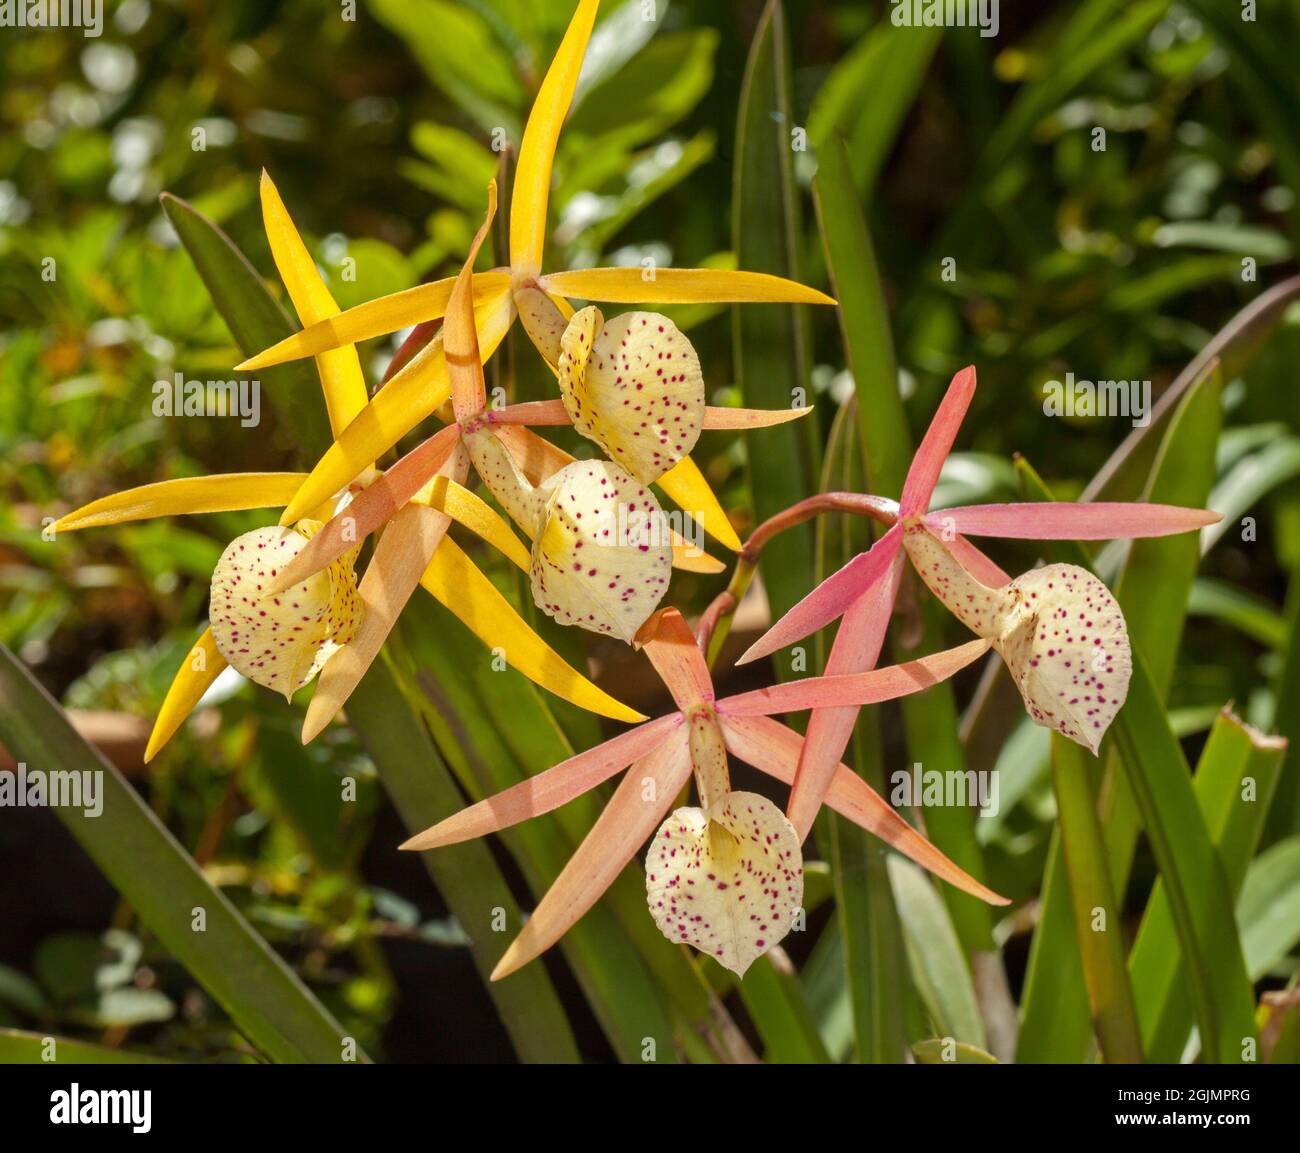 Cluster of unusual yellow flowers and green foliage of orchid, Brassocattleya 'Yellow Bird'. Stock Photo